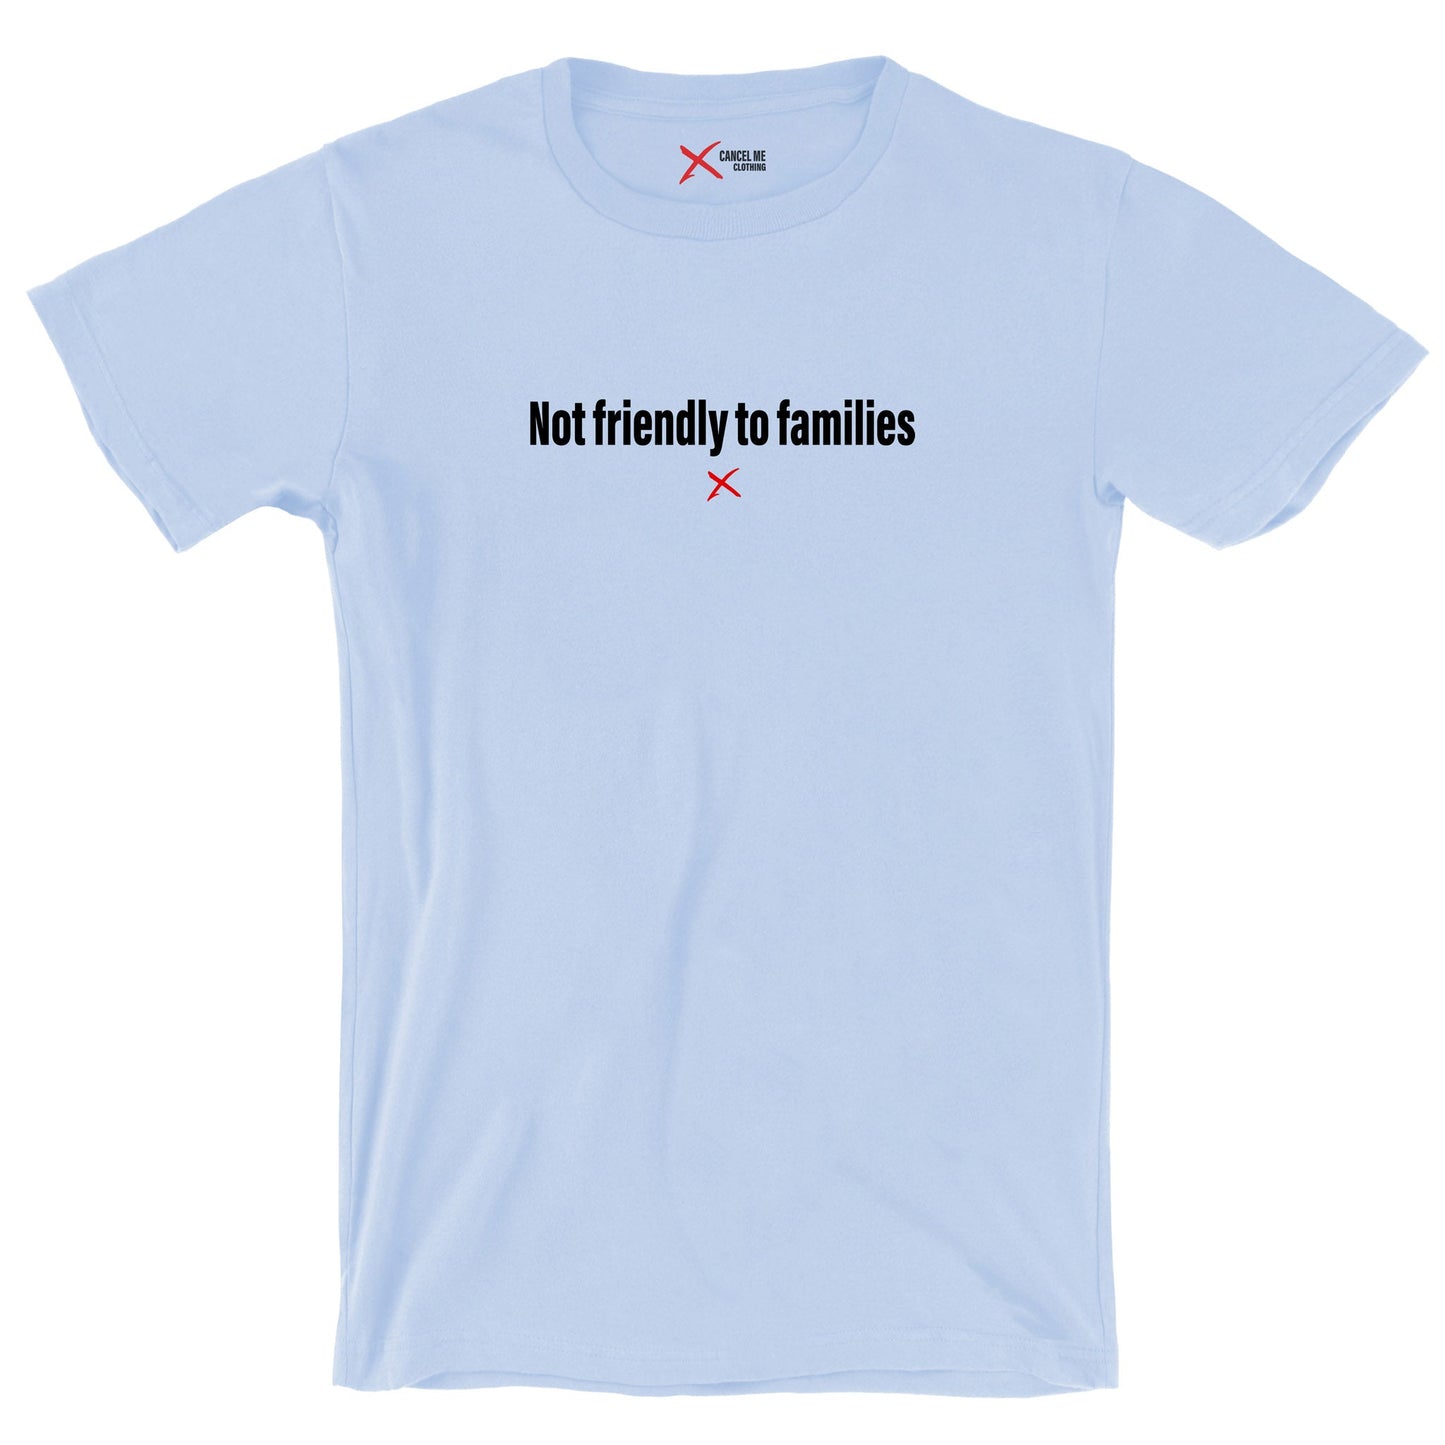 Not friendly to families - Shirt